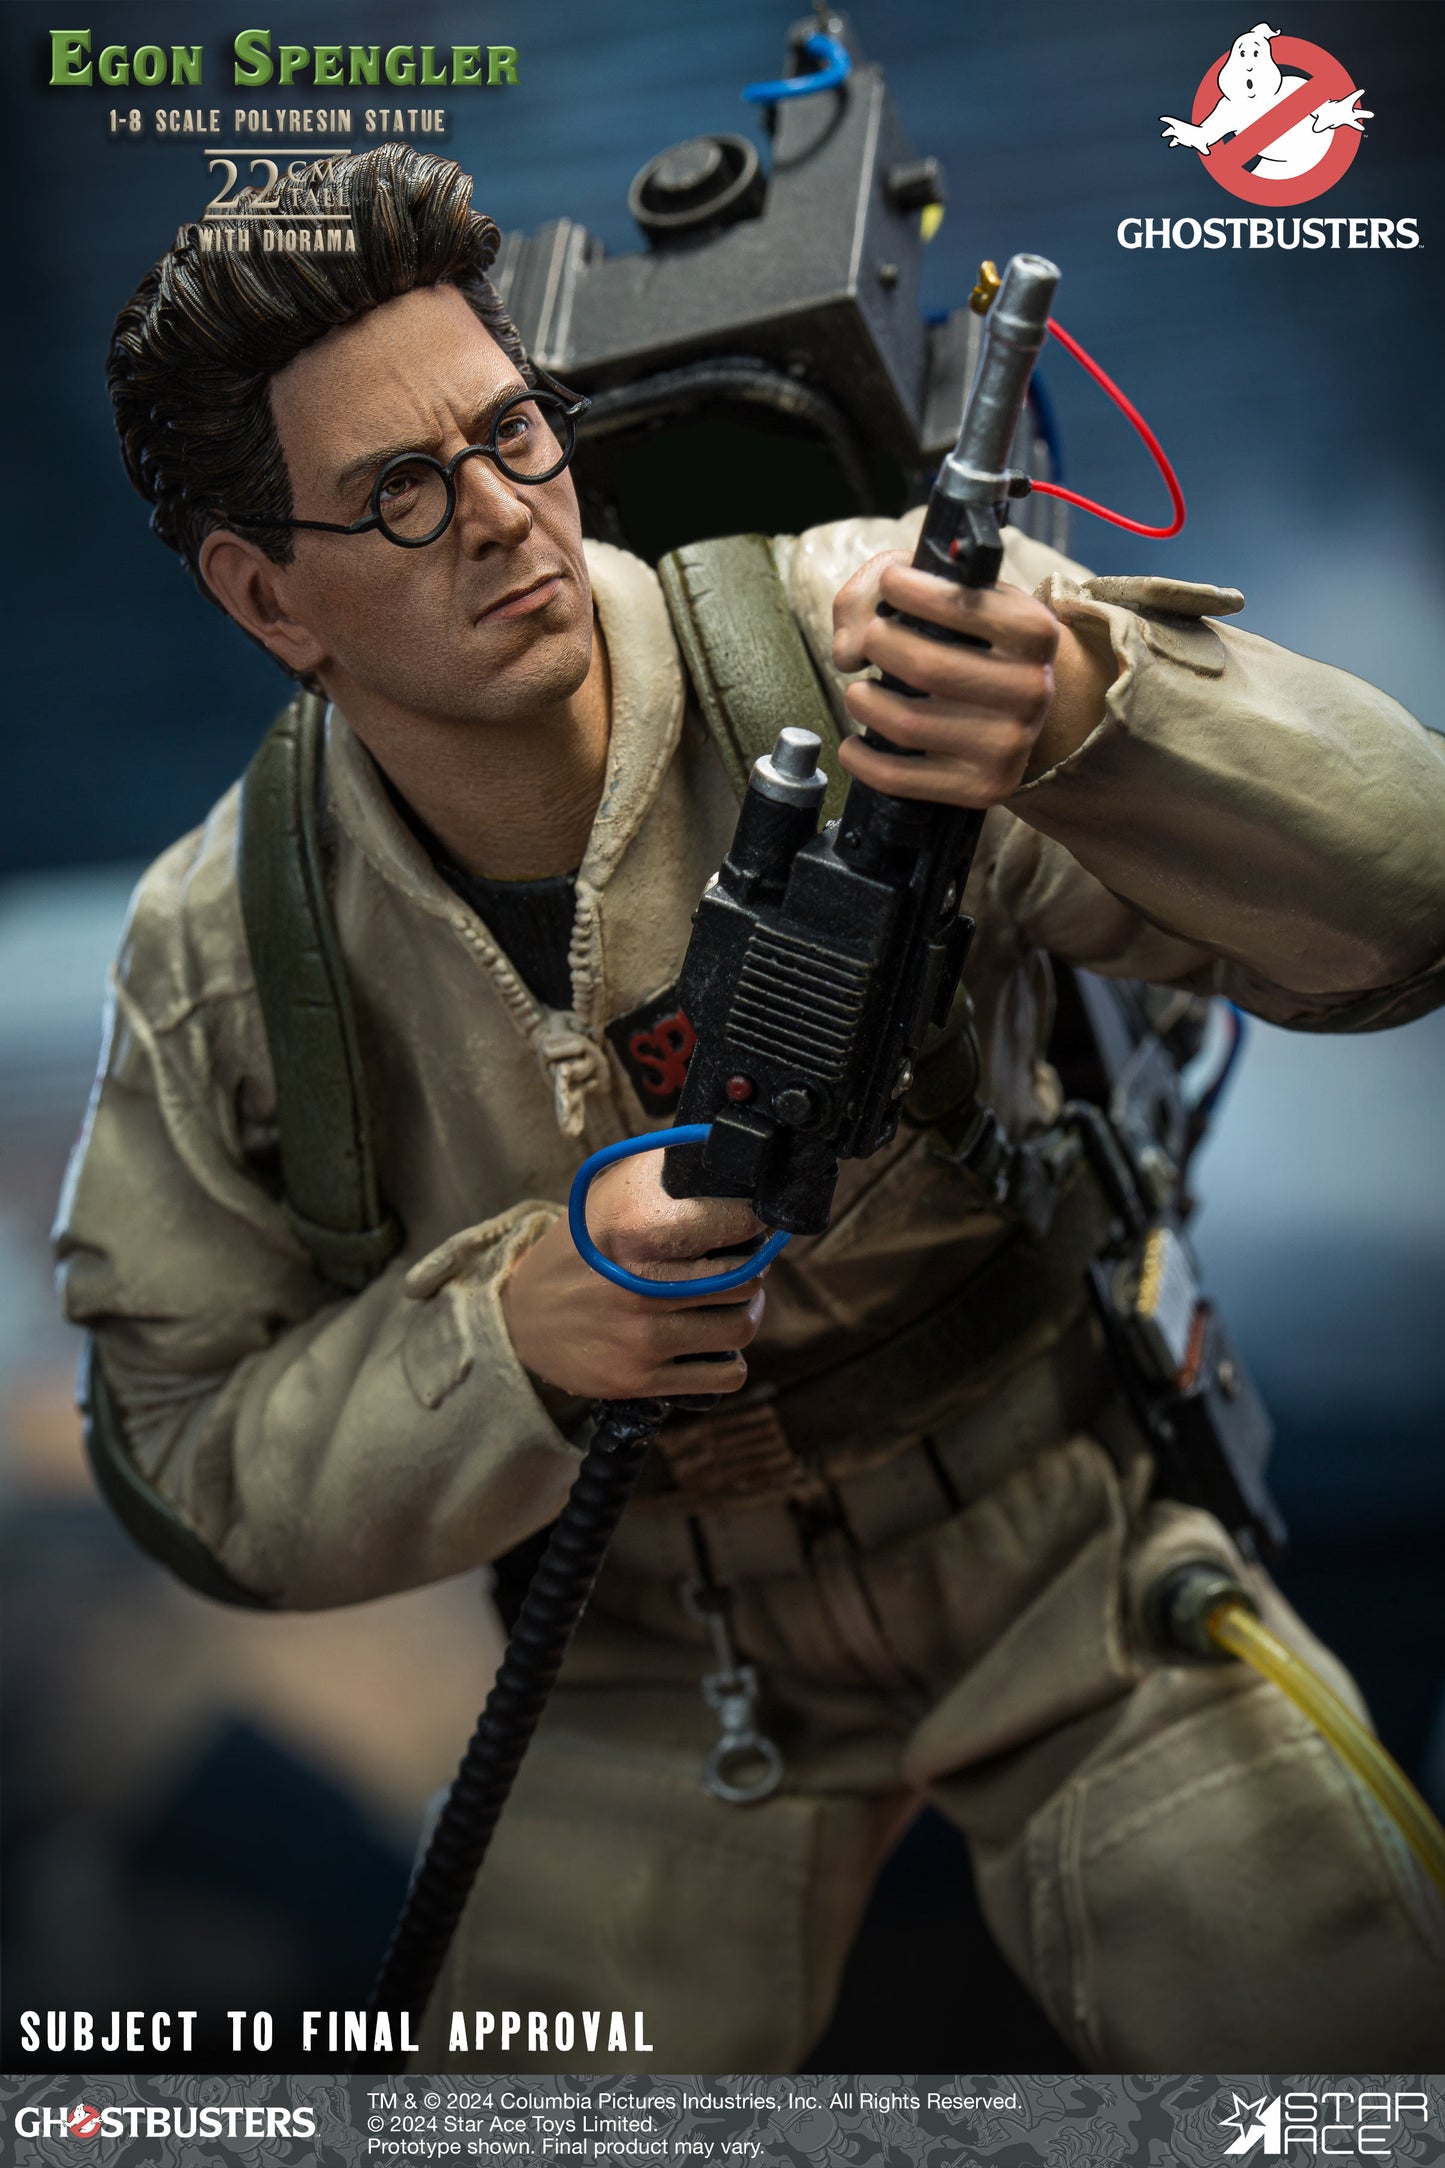 Ray Stantz and Egon Spangler Set Ghostbusters 1/8 Scale Statue Pre-order